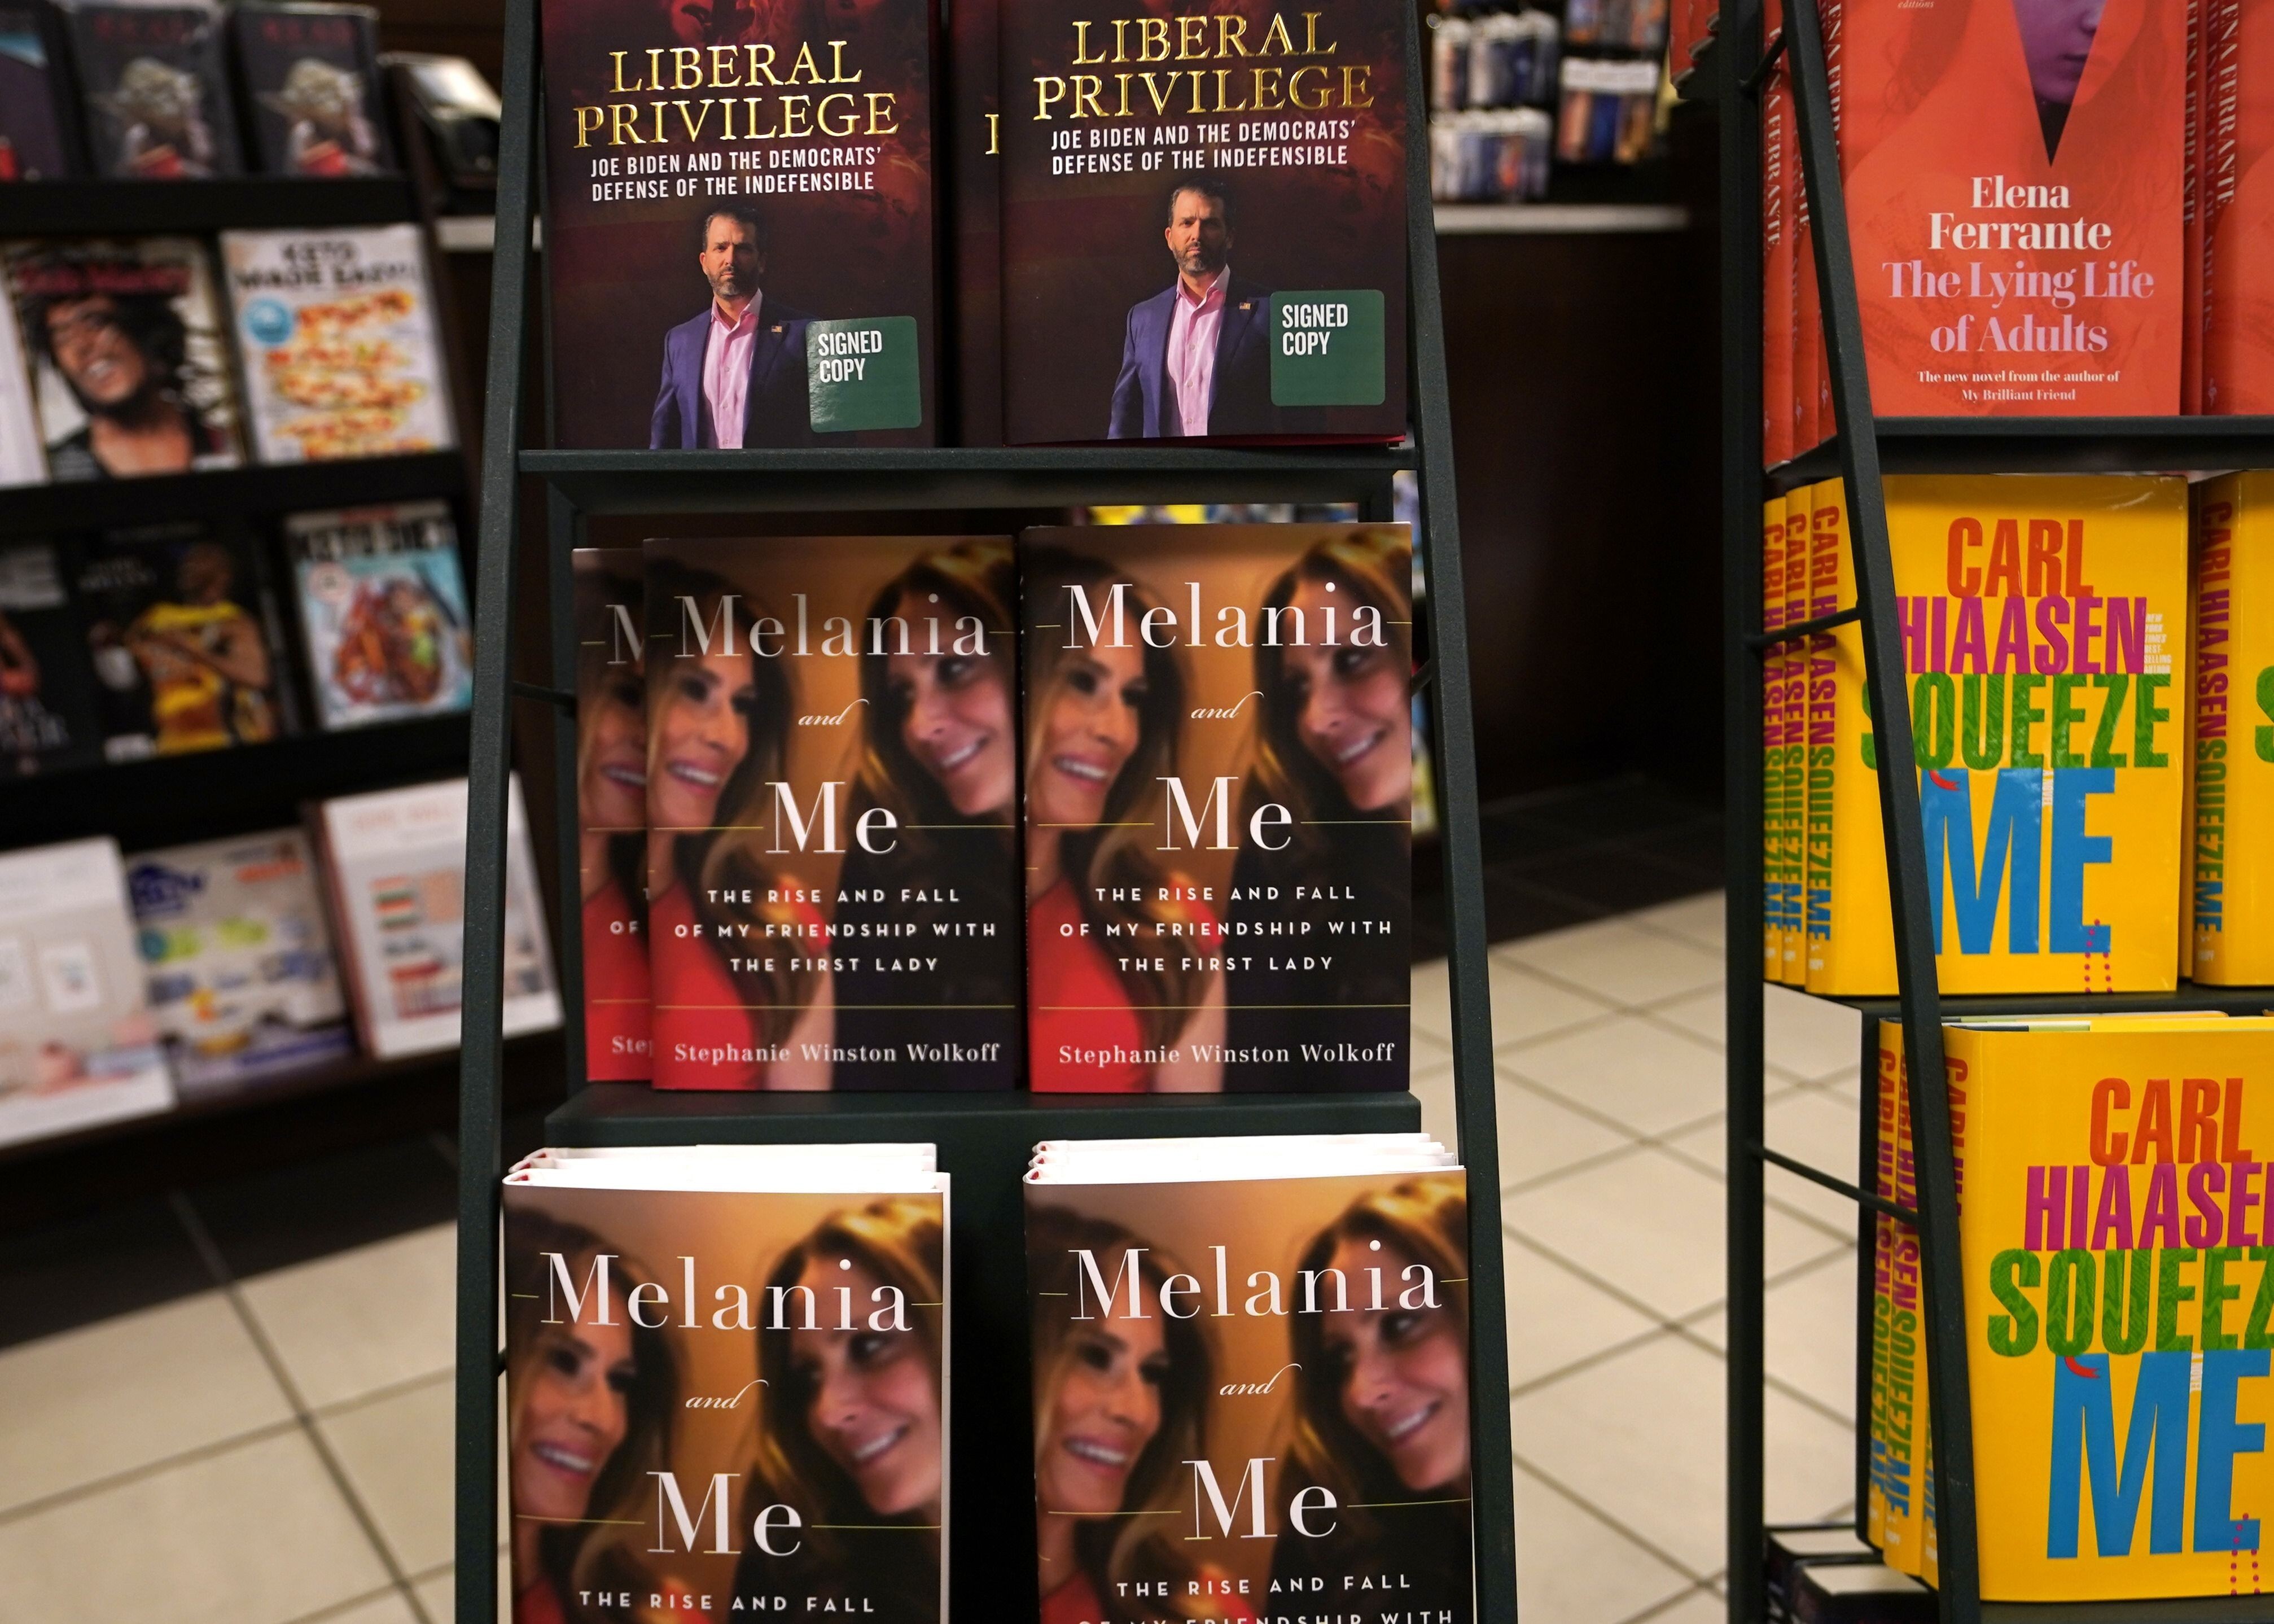 The book Melania and Me: The Rise and Fall of My Friendship with the First Lady by Stephanie Winston Wolkoff. Photo: AFP